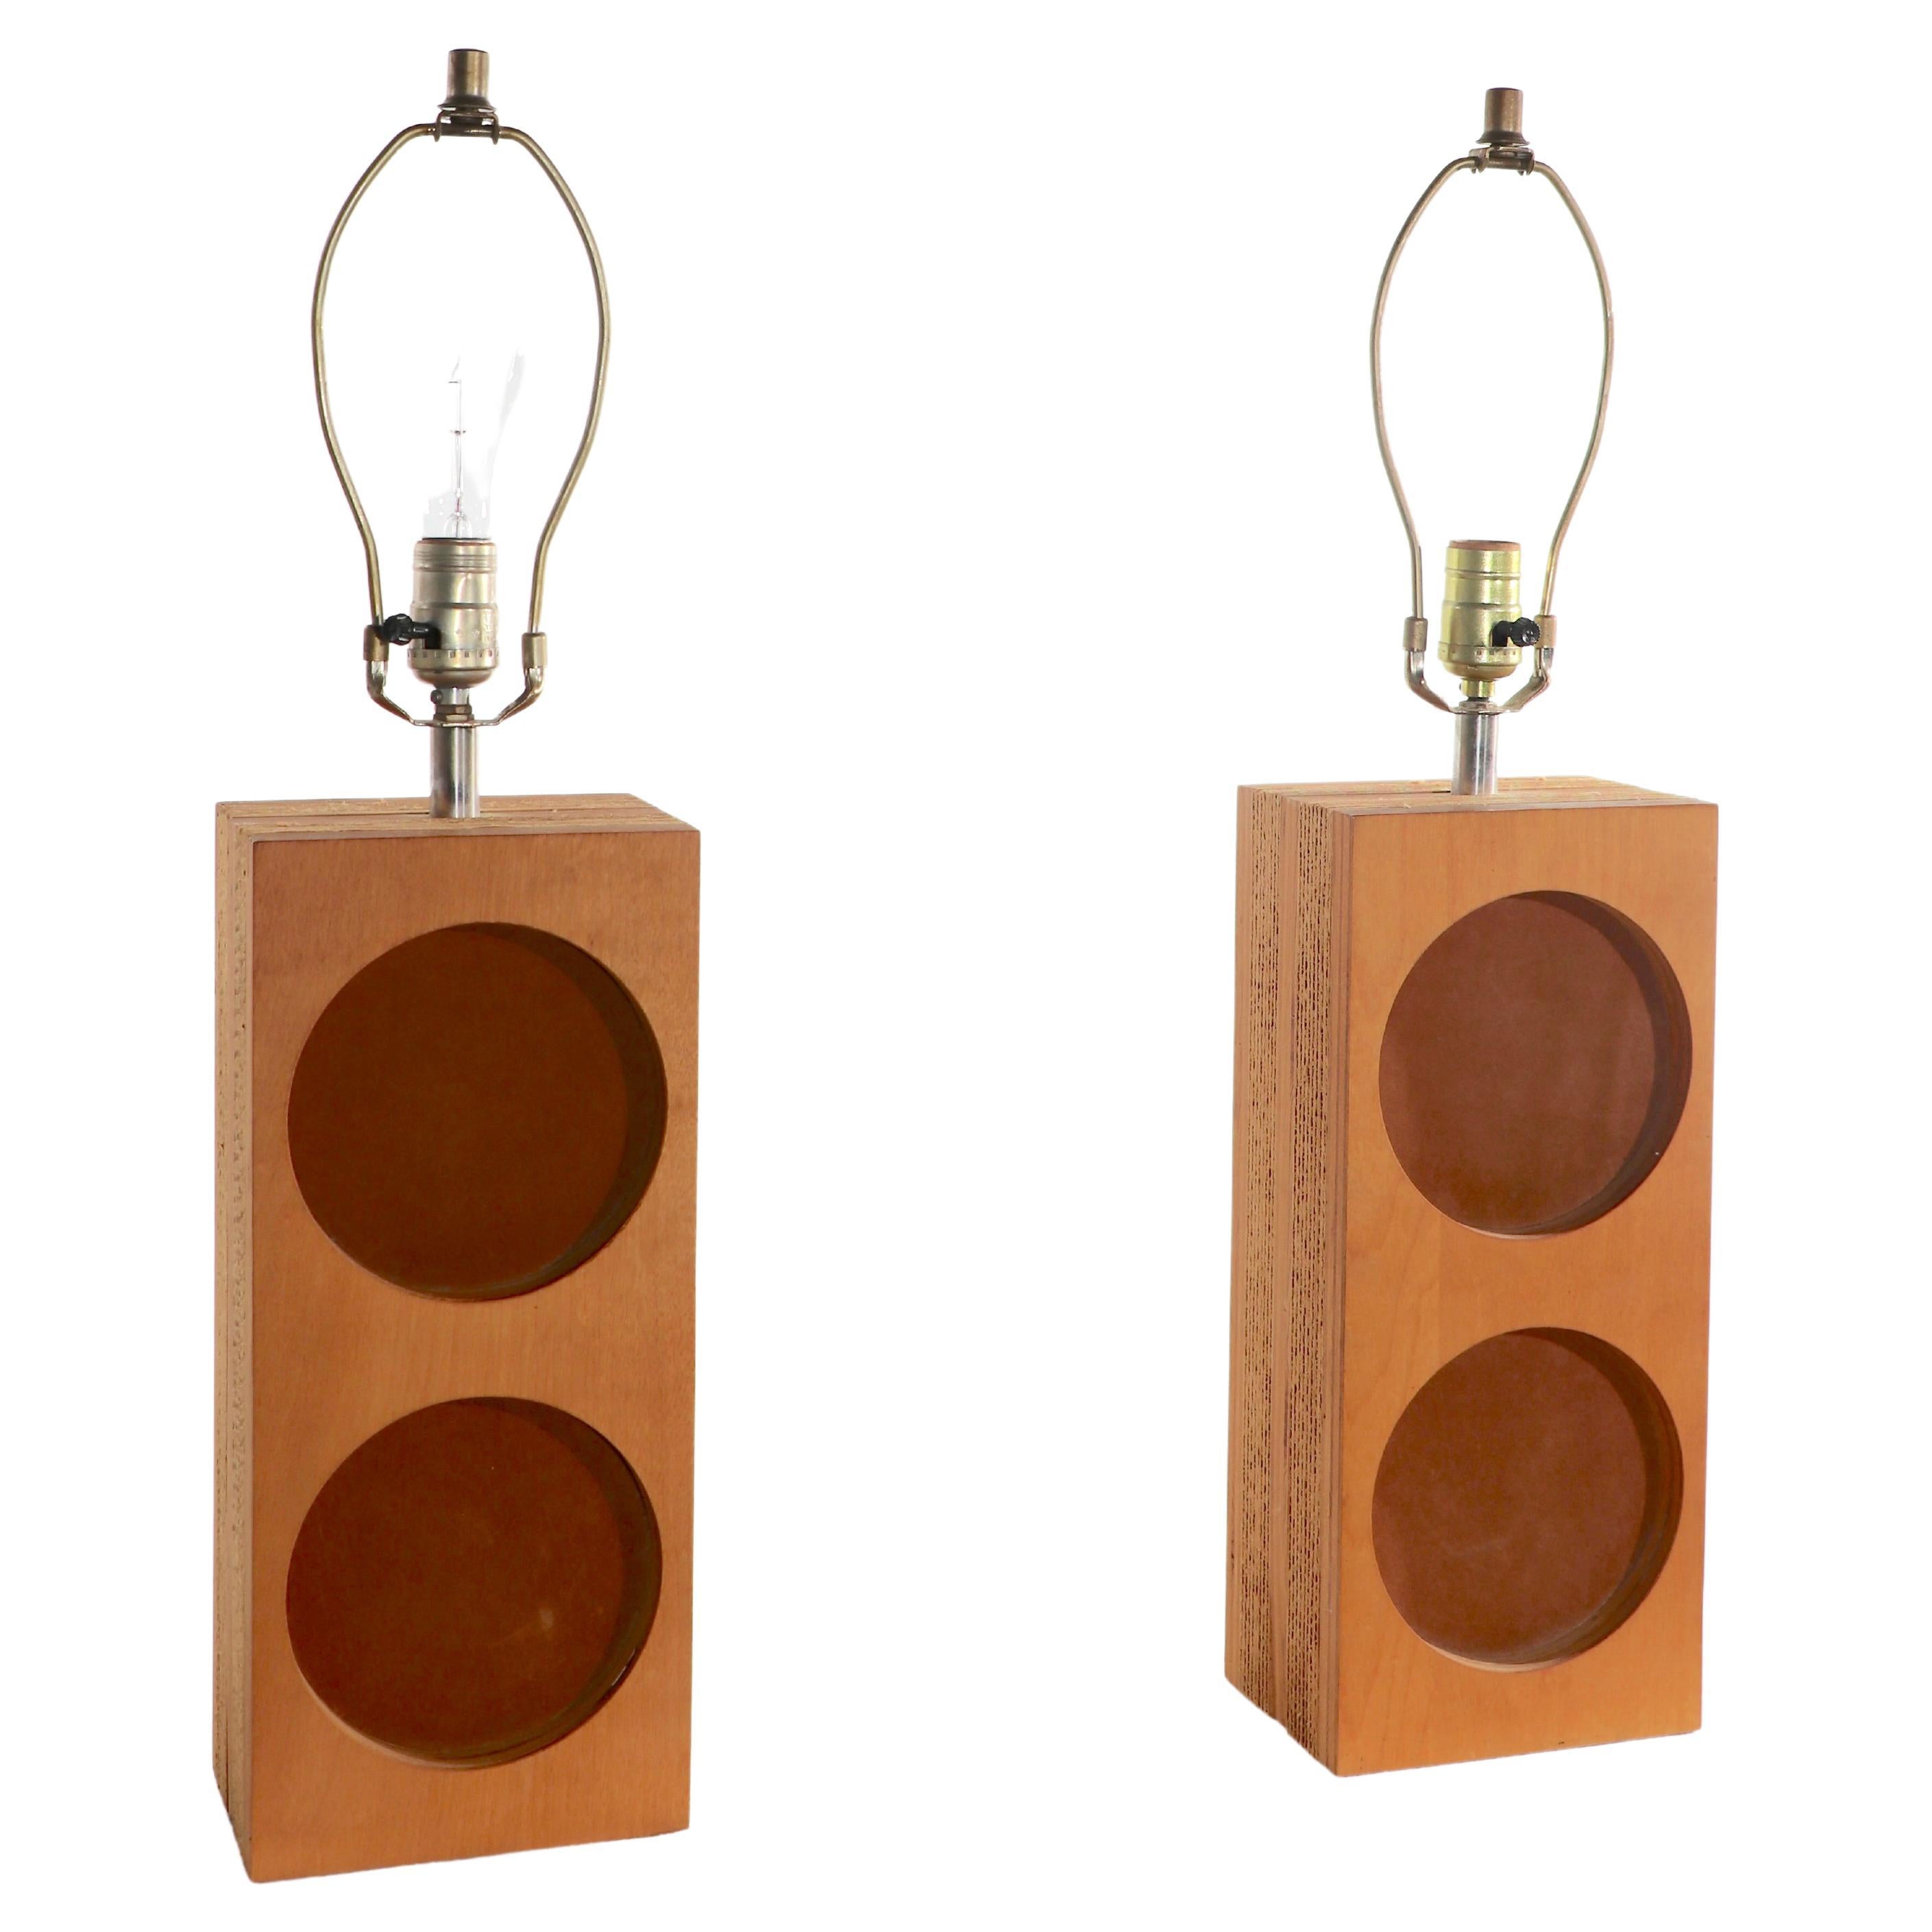 Pr. Cardboard Plywood and Ultra Suede Table Lamps by Gregory Van Pelt